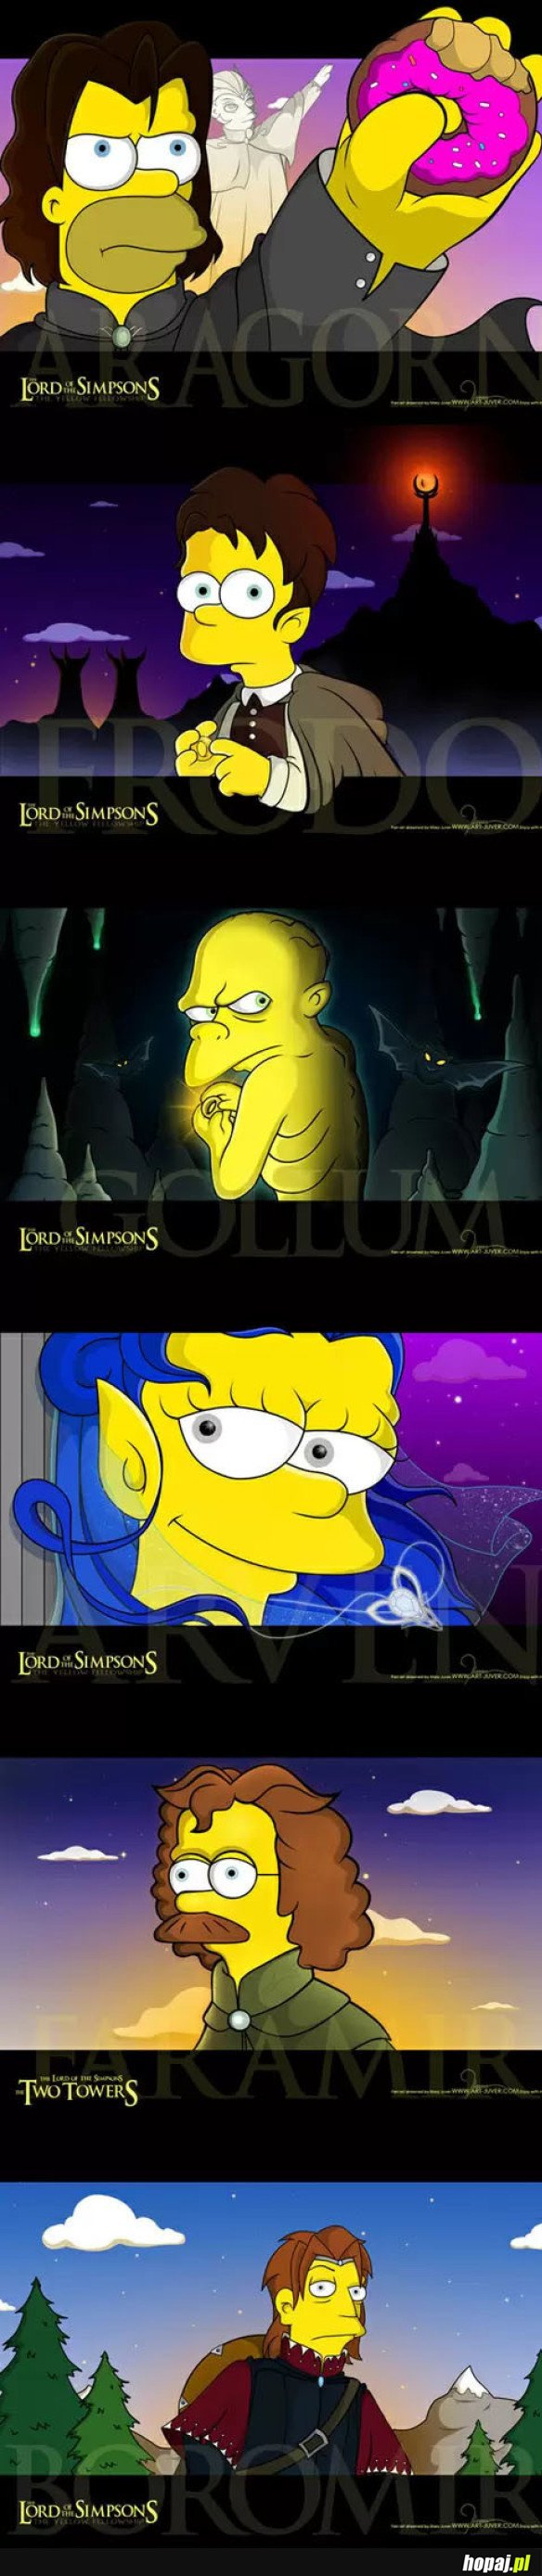 LORD OF THE SIMPSONS